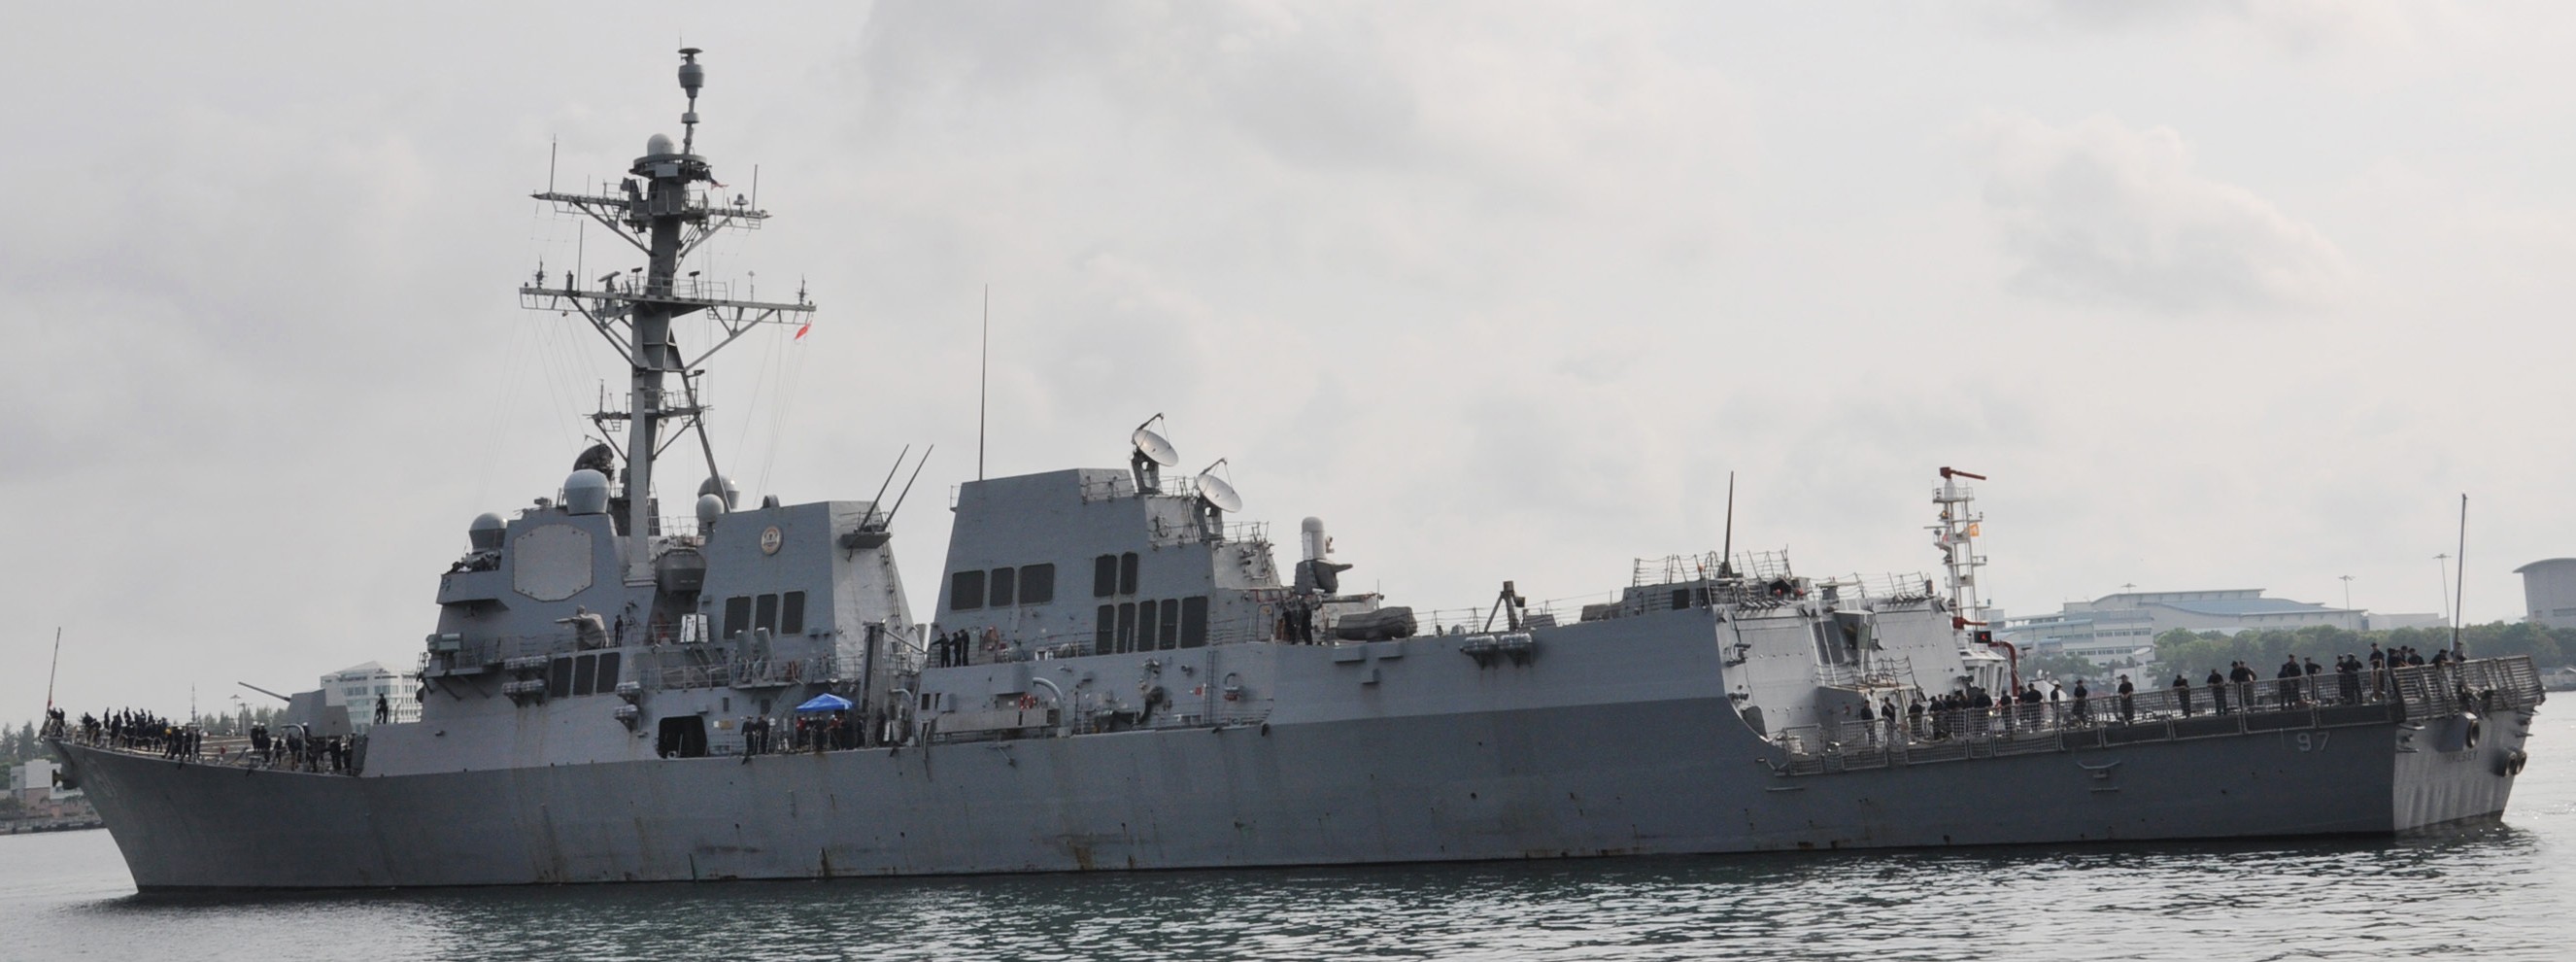 ddg-97 uss halsey arleigh burke class guided missile destroyer changi naval base singapore 34